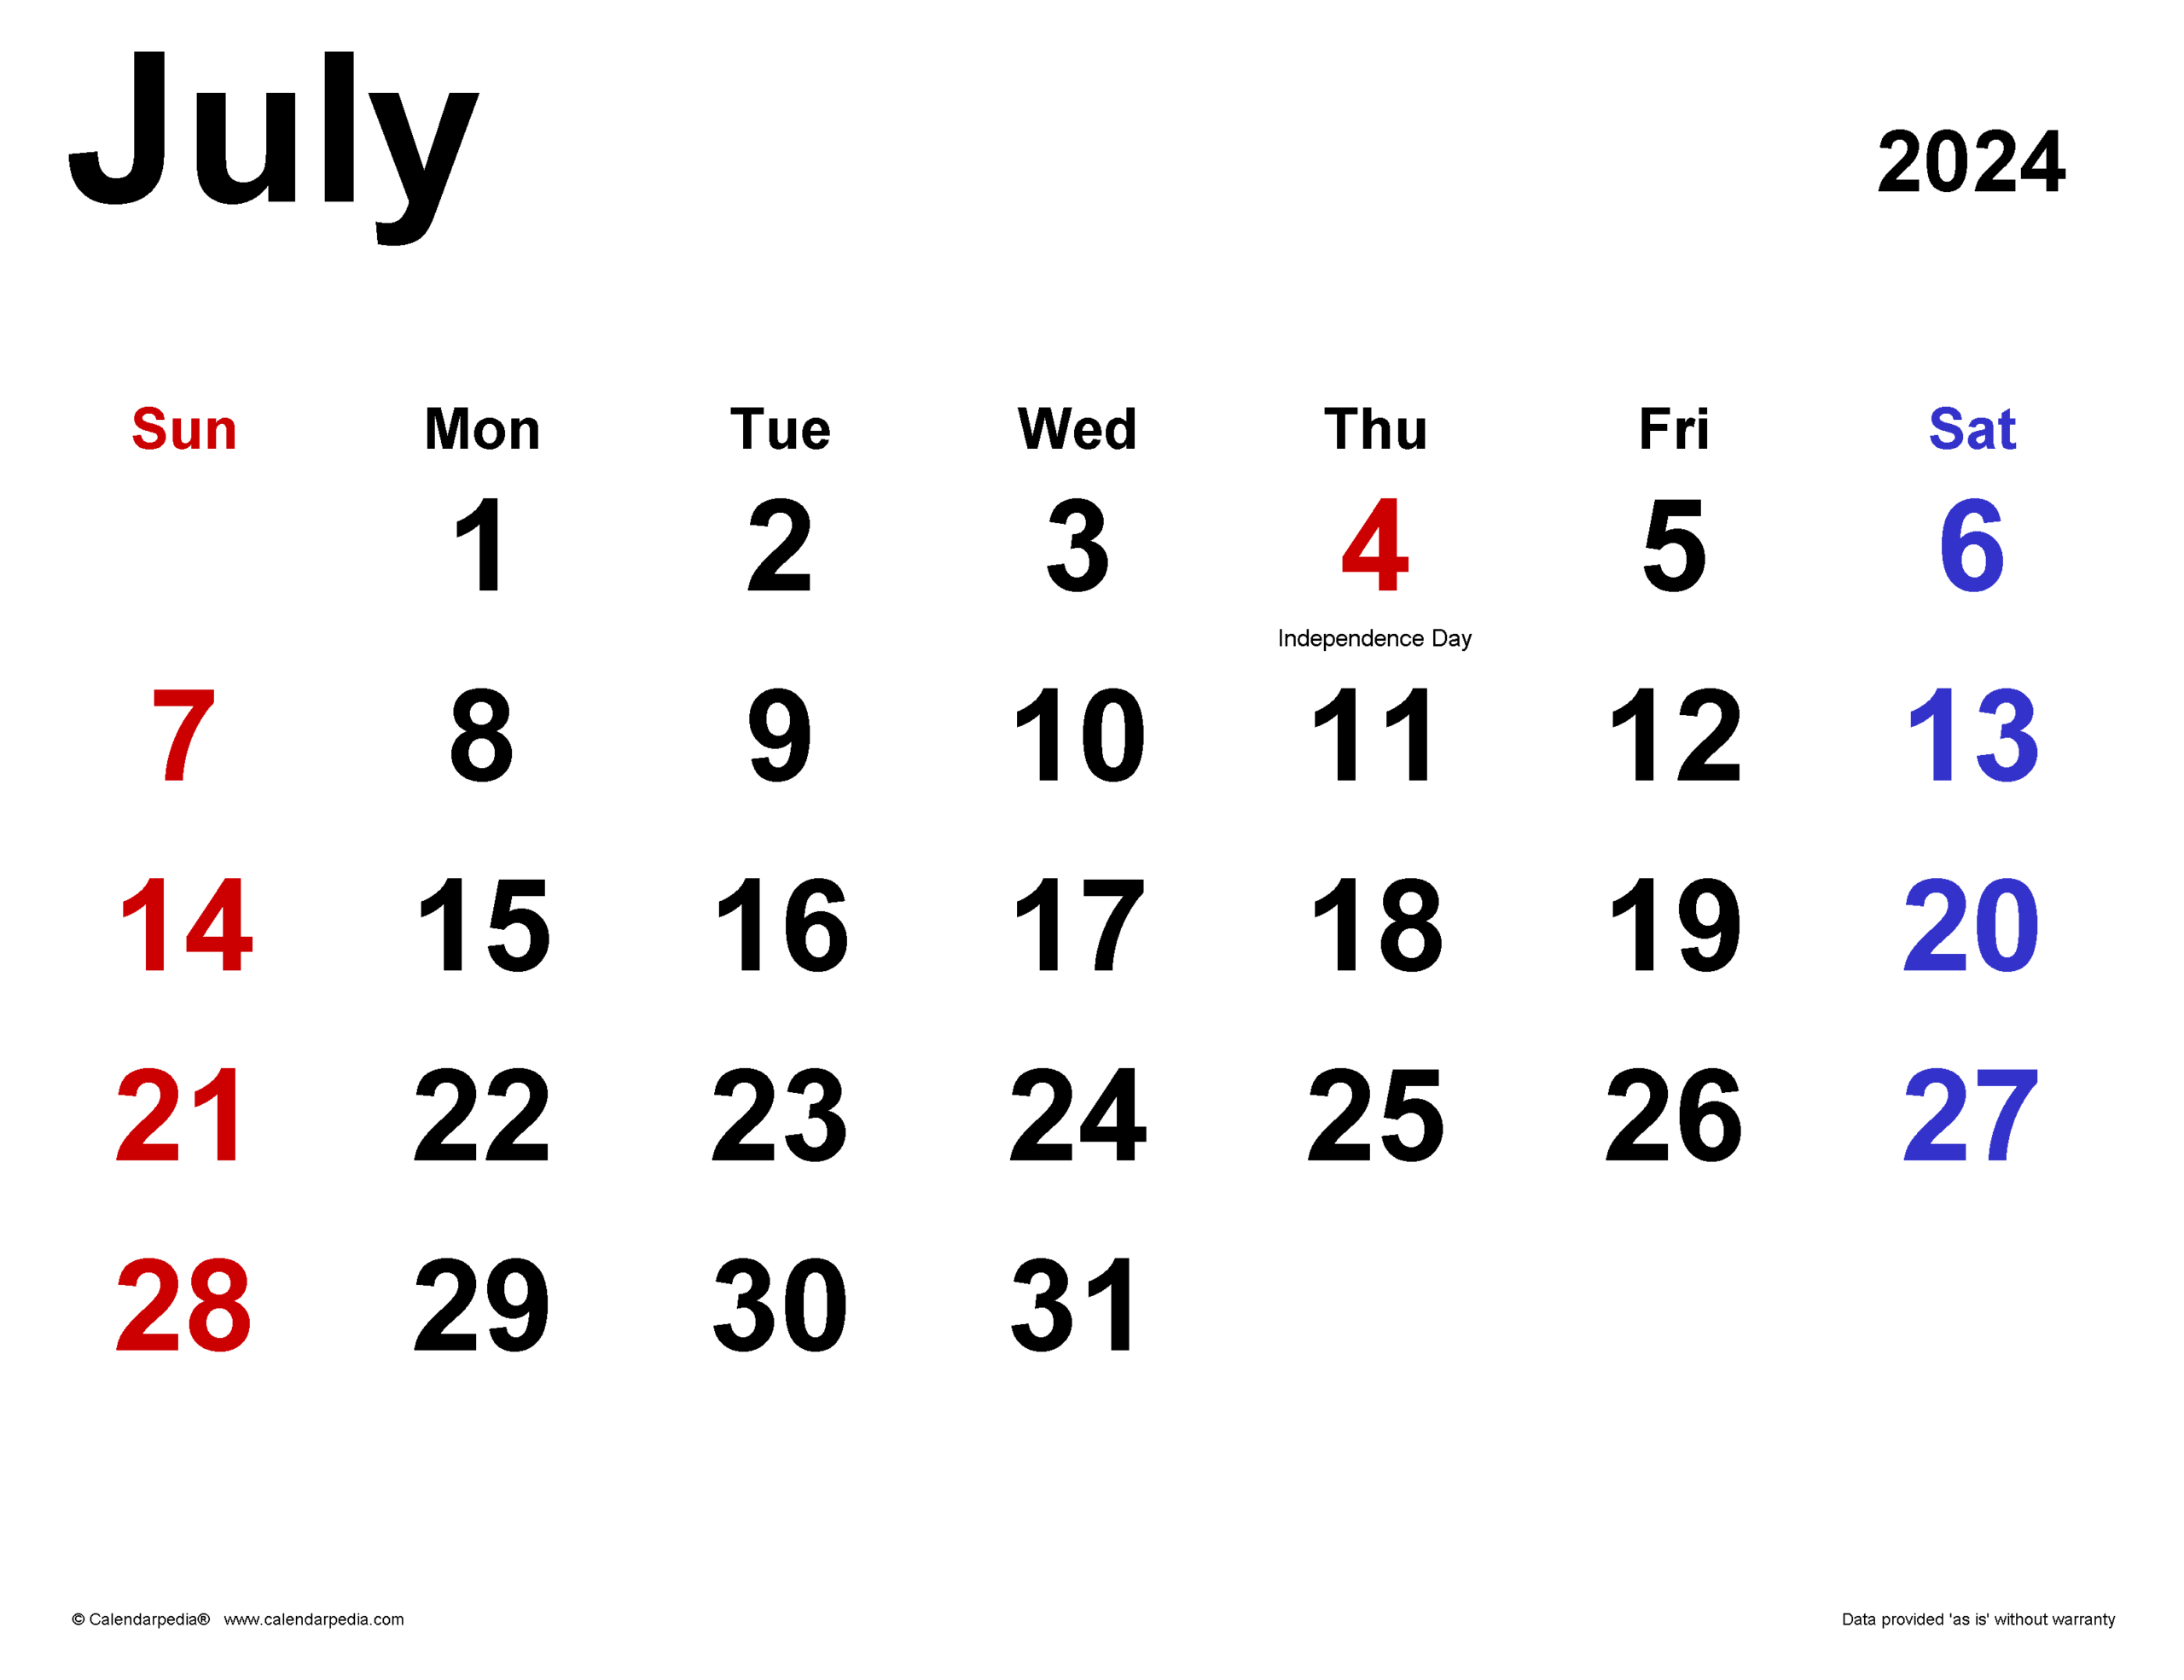 July 2024 Calendar | Templates For Word, Excel And Pdf intended for Holiday Calendar 2024 July